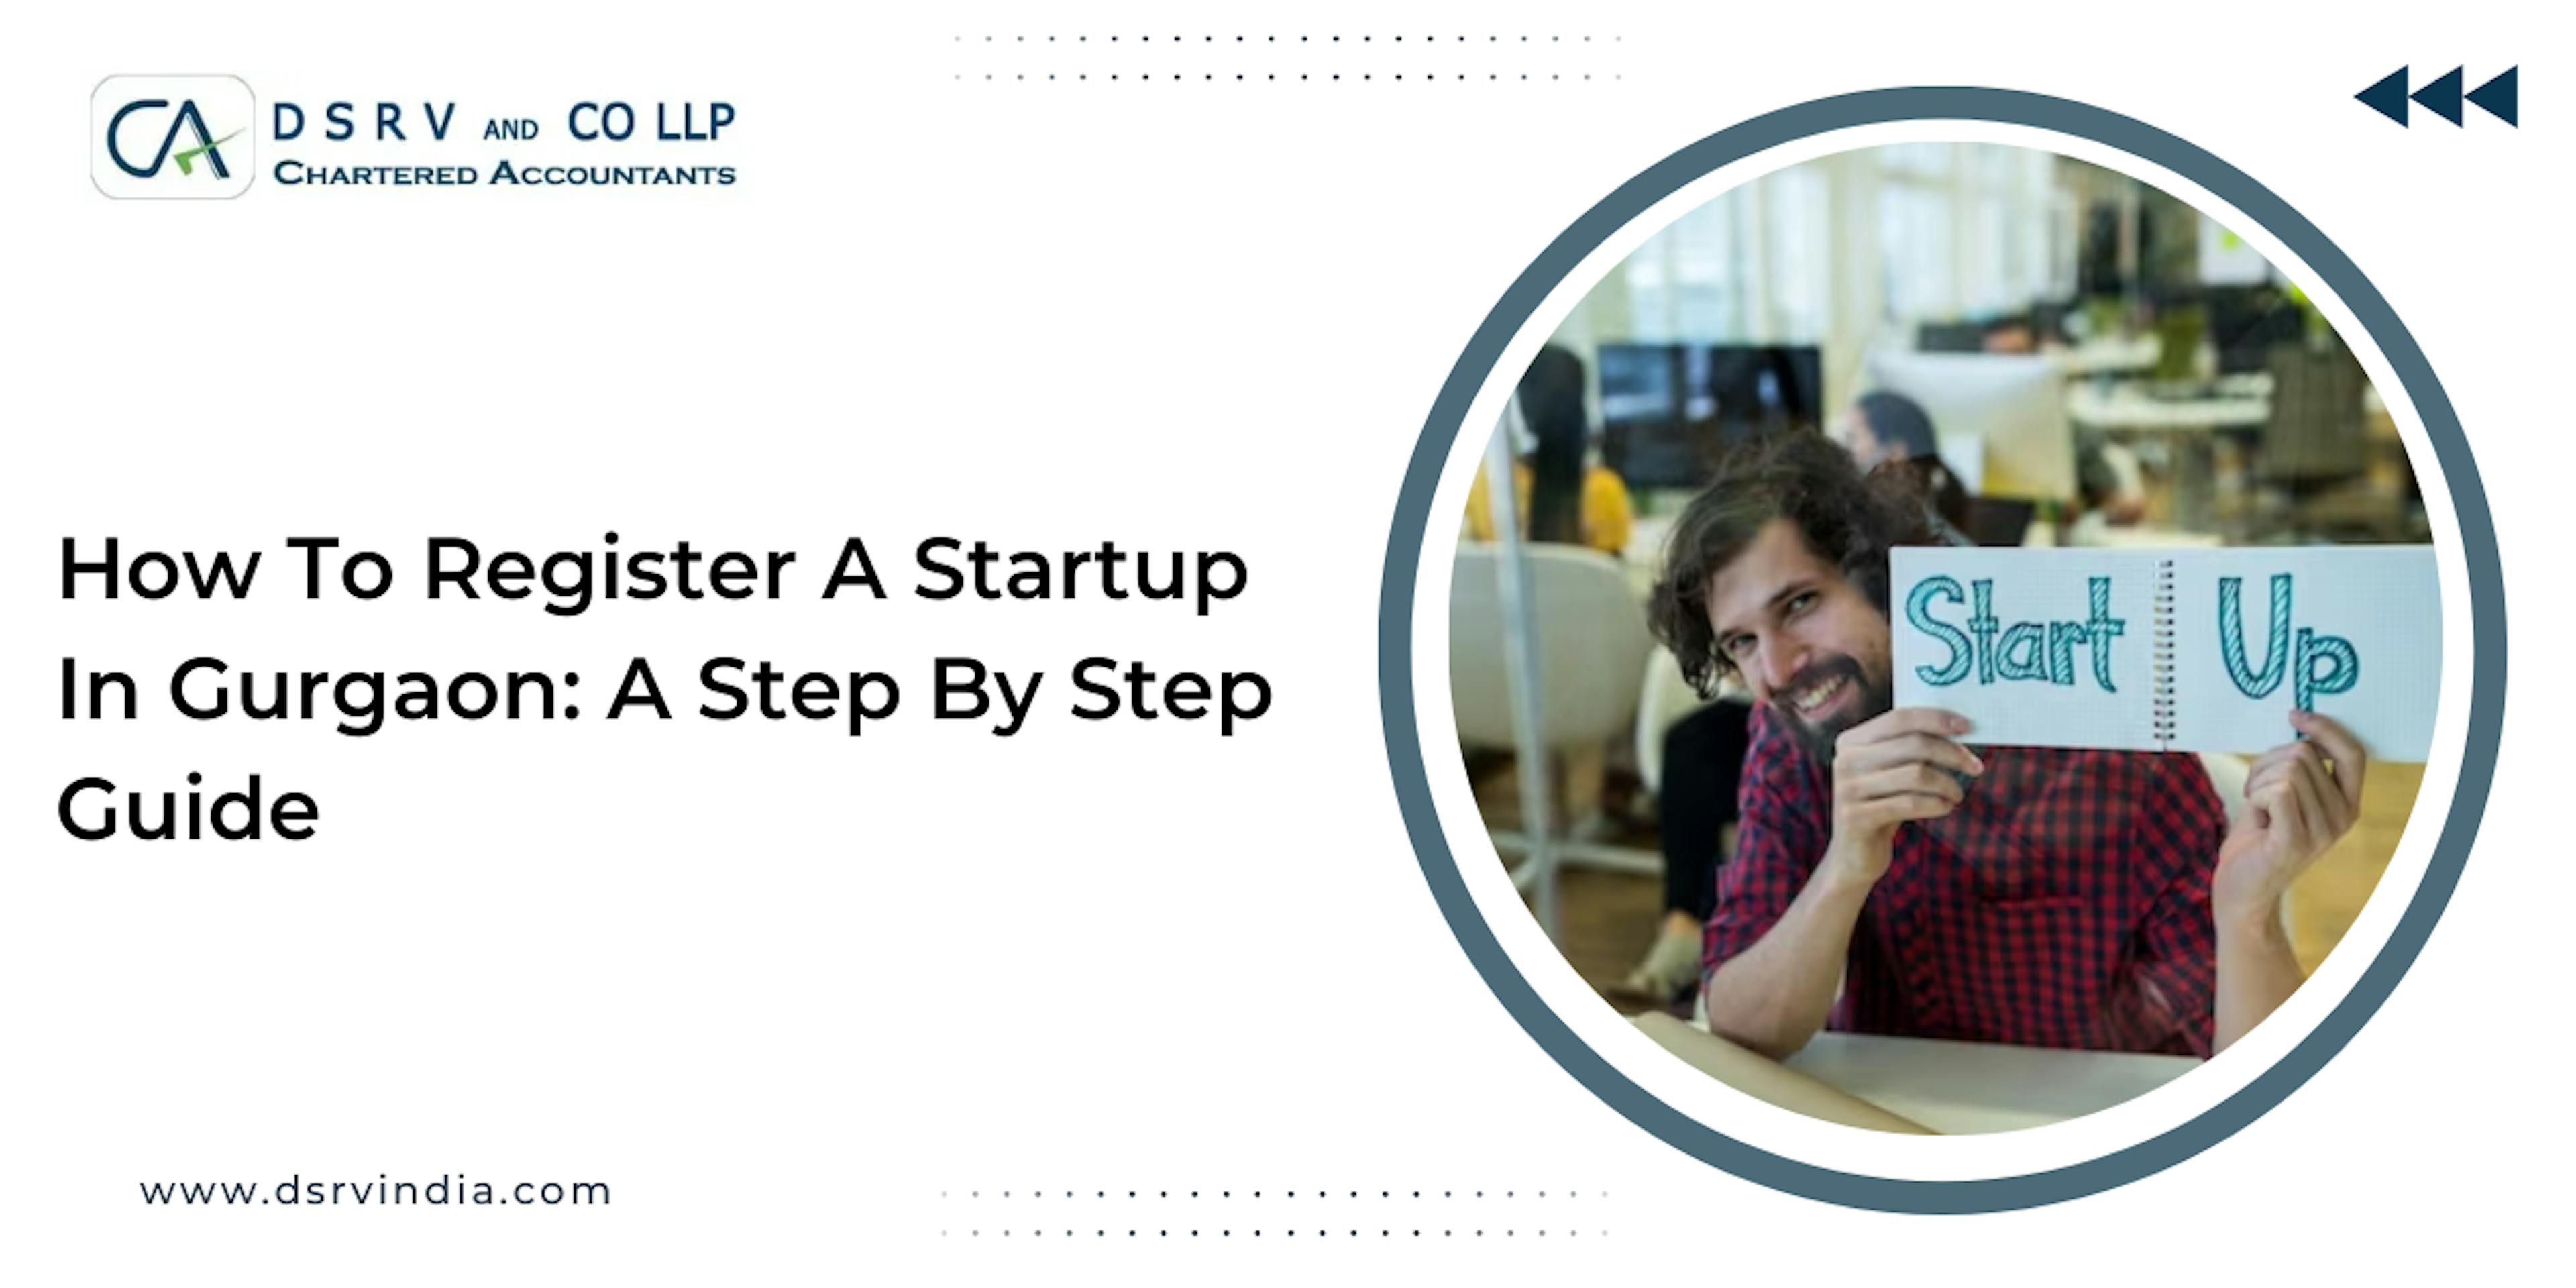 How To Register A Startup In Gurgaon A Step By Step Guide: Blog Poster